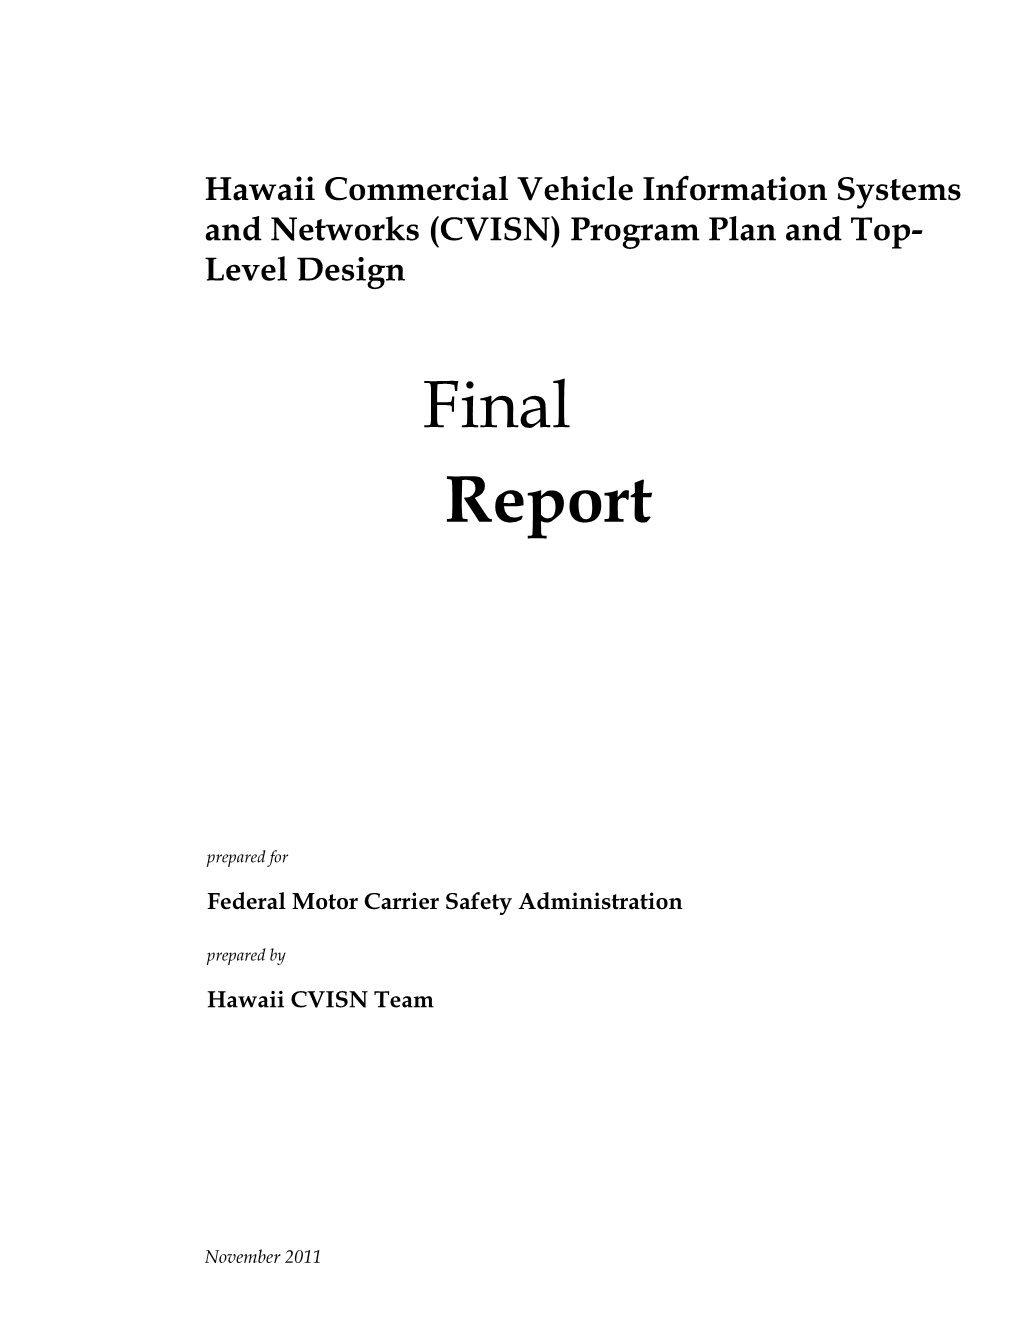 Hawaii Commercial Vehicle Information Systems and Networks (CVISN) Program Plan and Top- Level Design